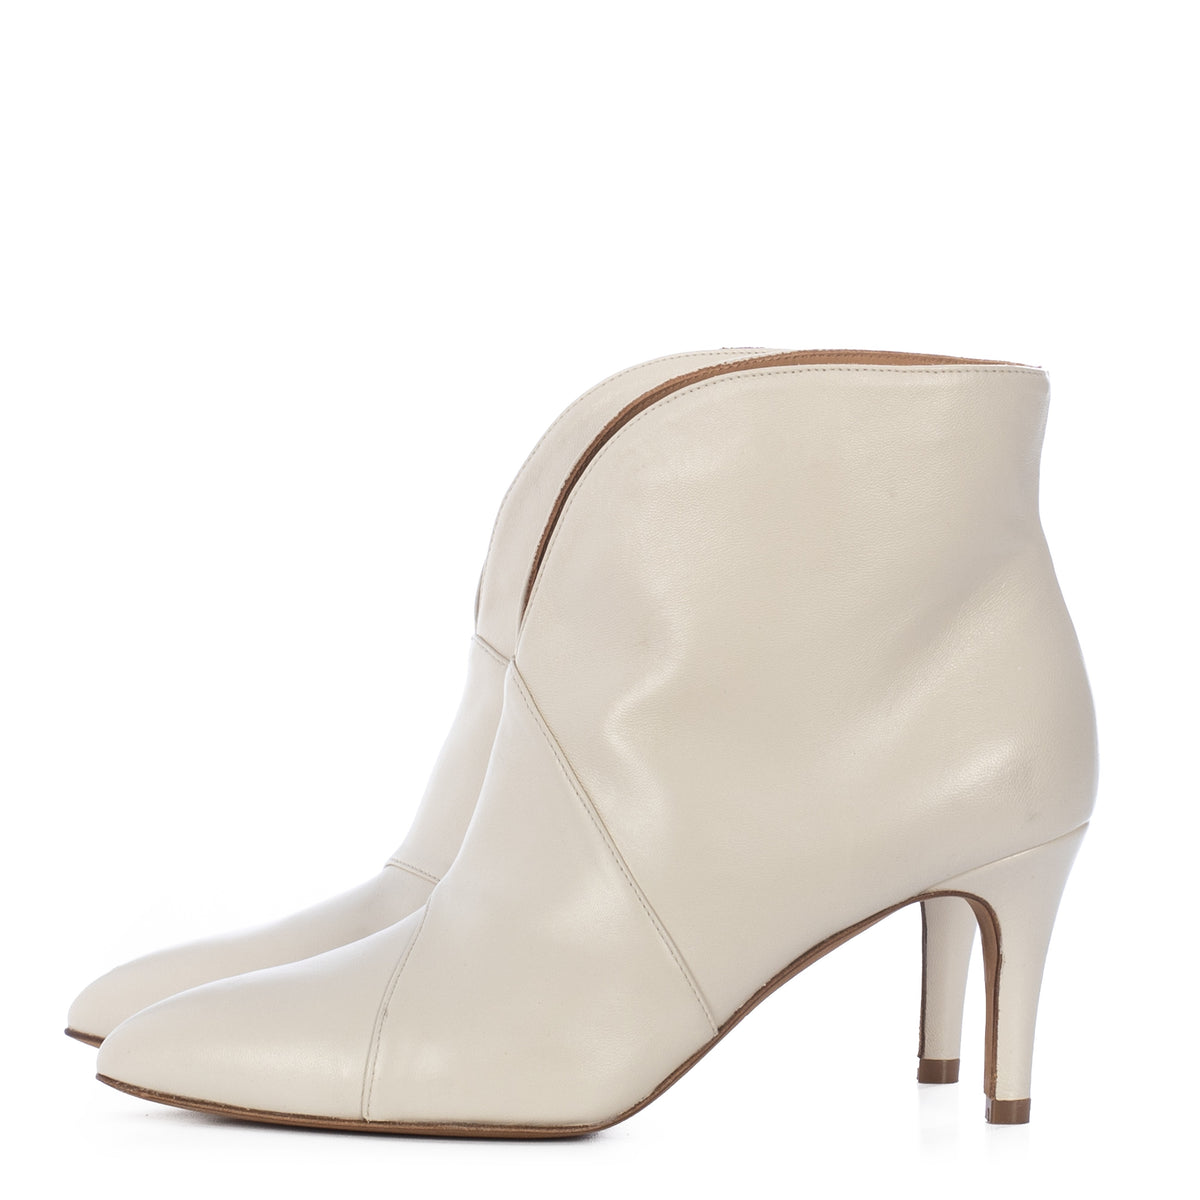 TORAL CREAM LEATHER ANKLE BOOTS – Toral